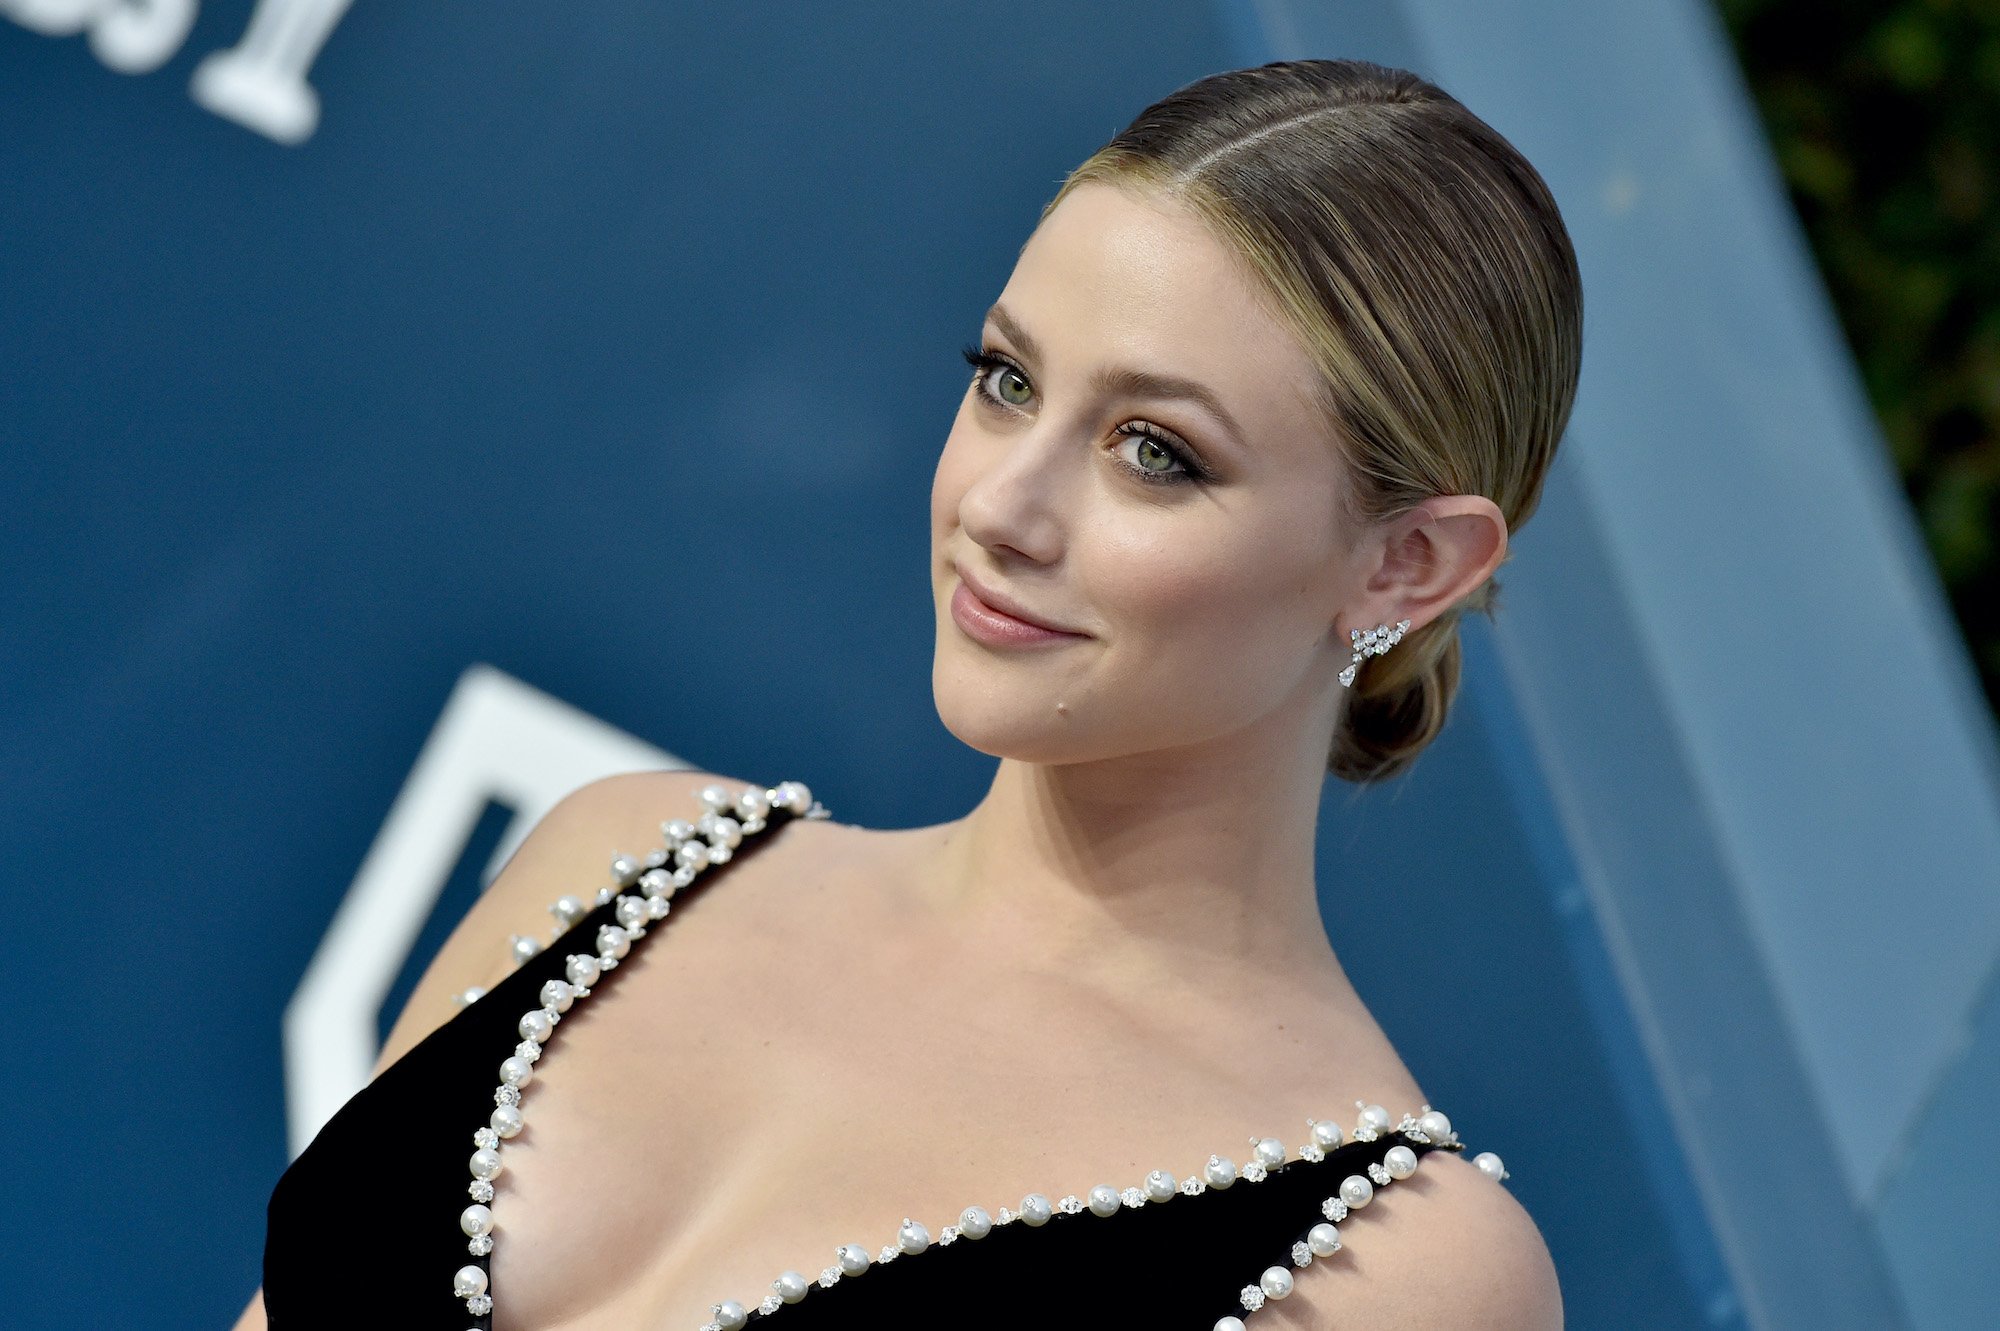 Lili Reinhart smiling in front of a blue background